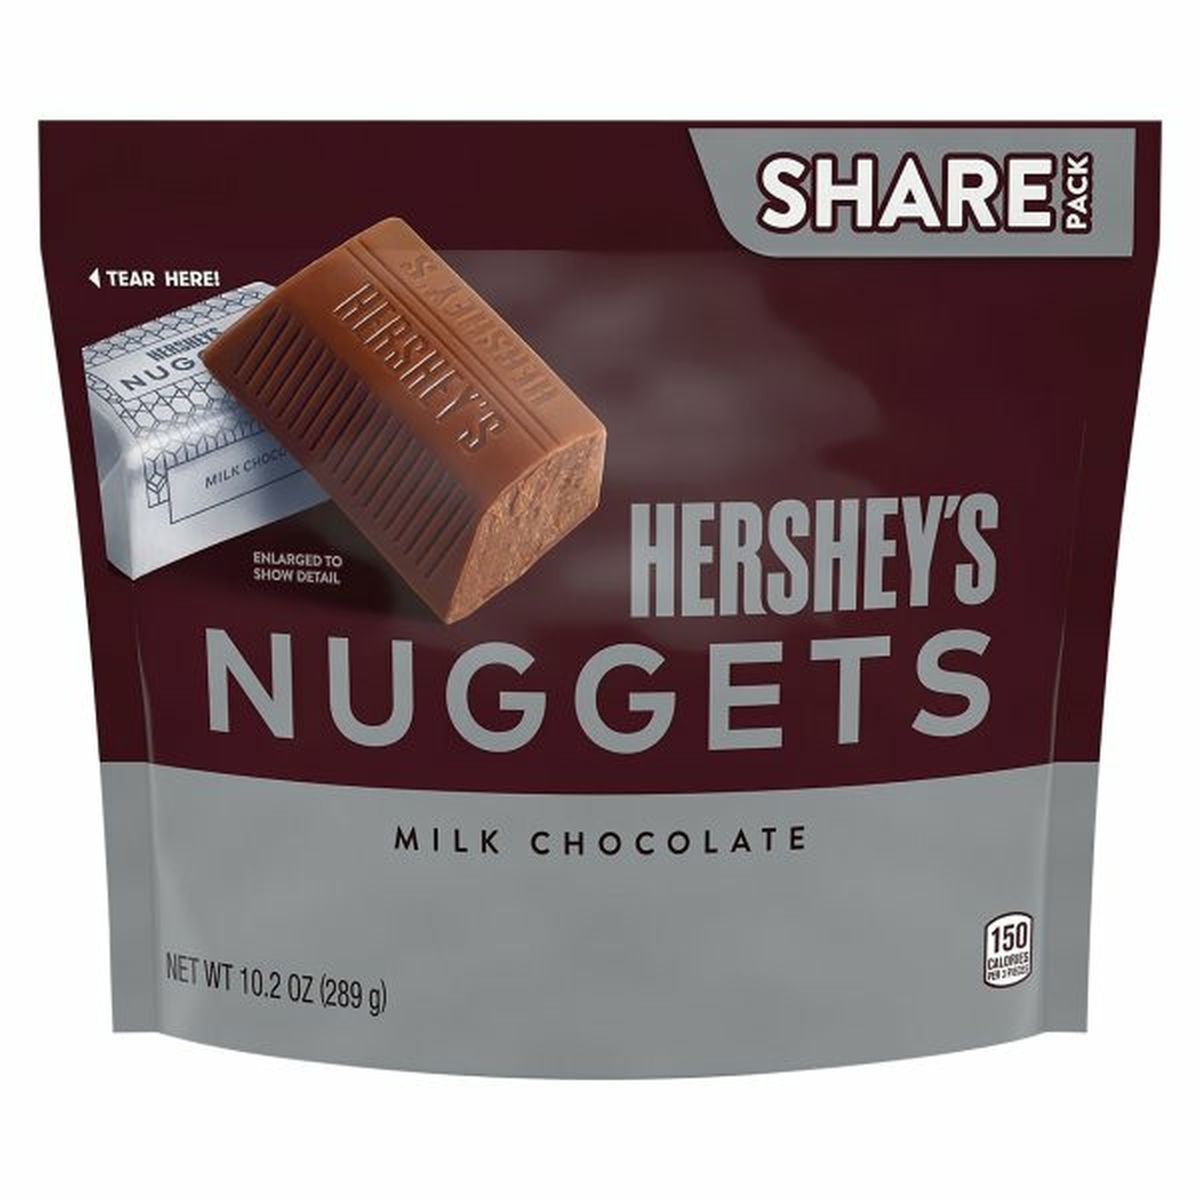 Calories in Hershey's Nuggets Milk Chocolate, Share Pack